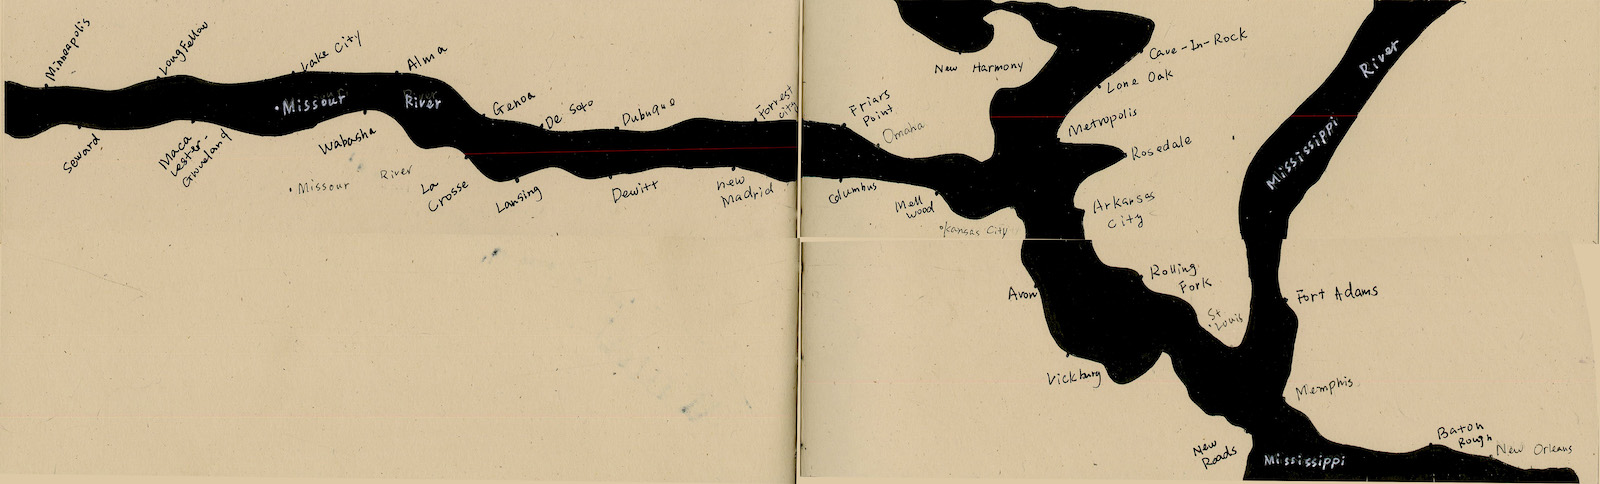 River Book I(Top), River Book II(Bottom), Page 10, Missouri River and Mississippi River